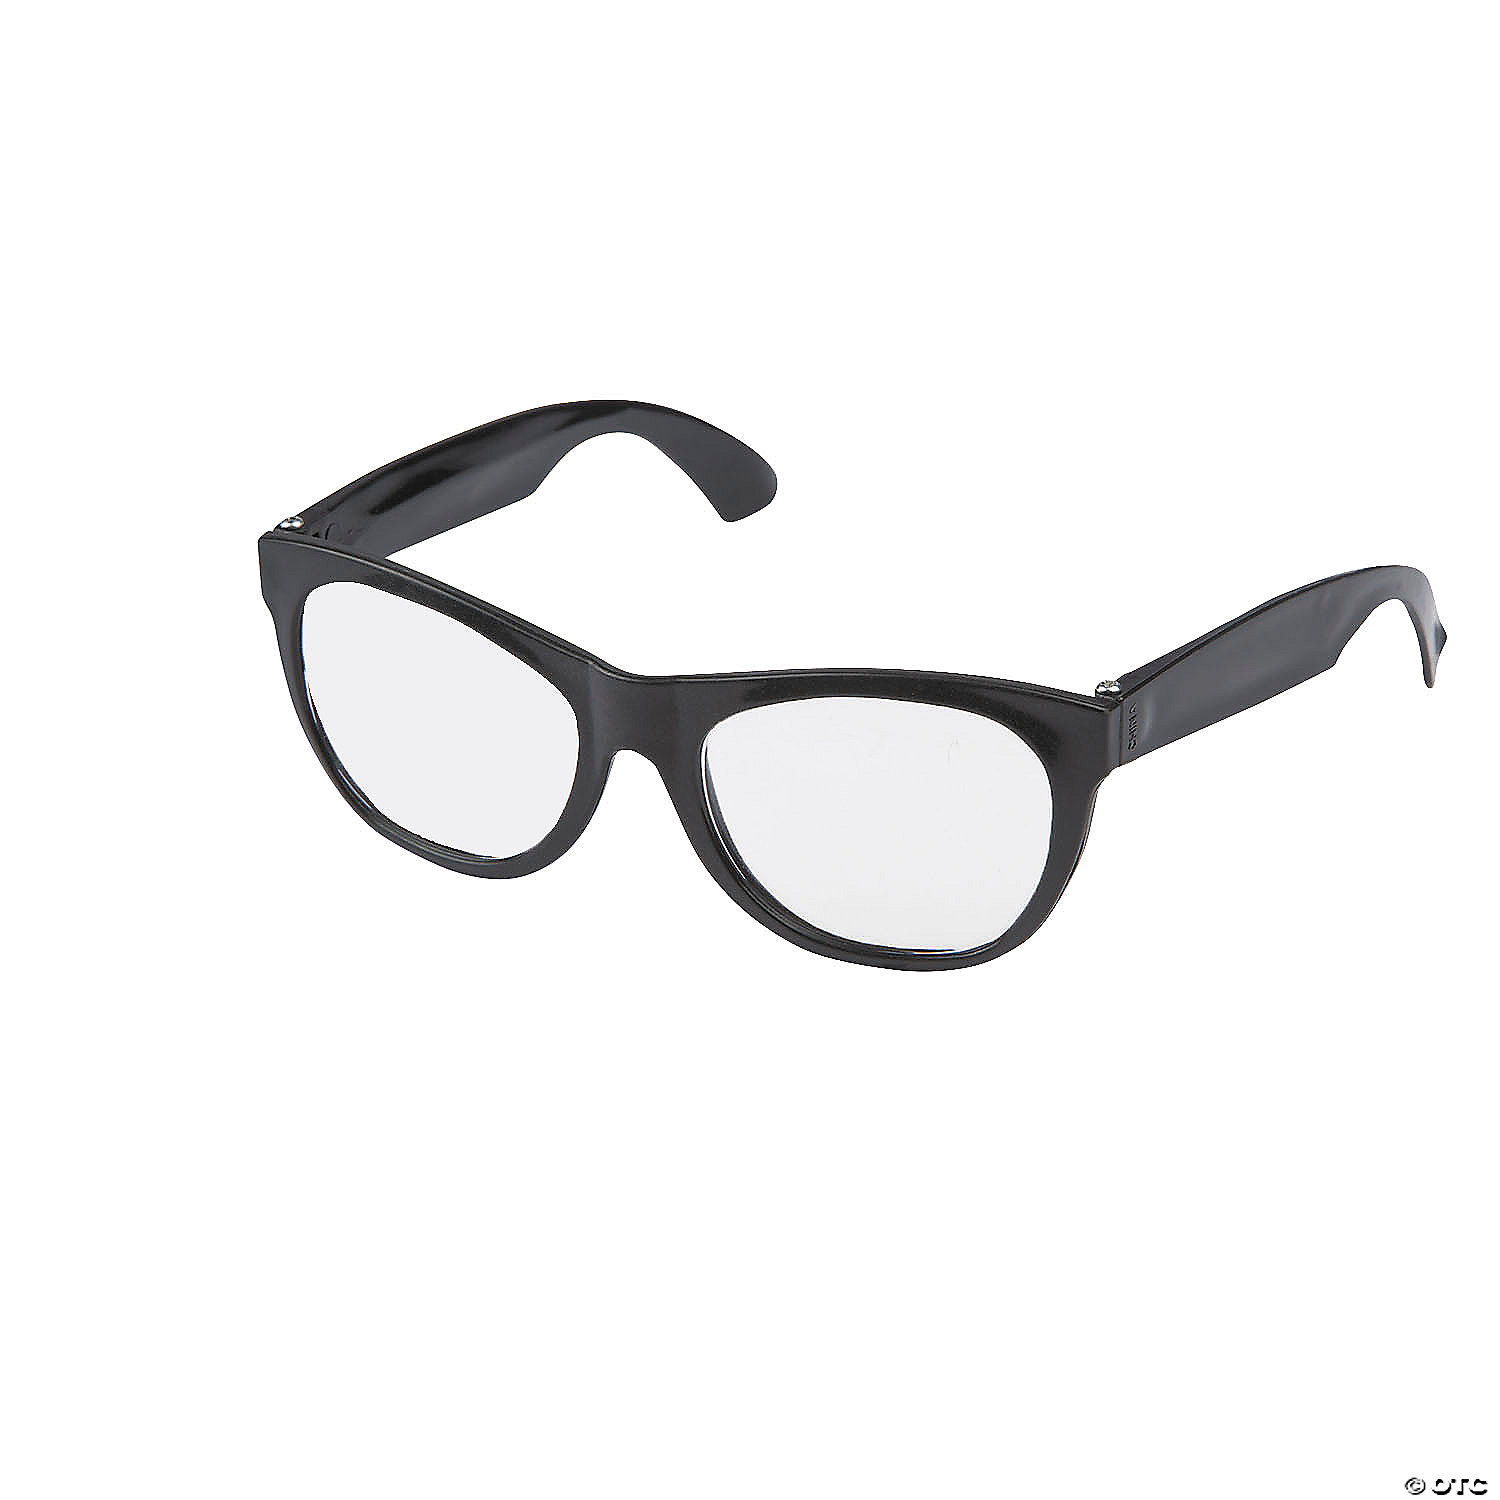 where to get clear lens glasses